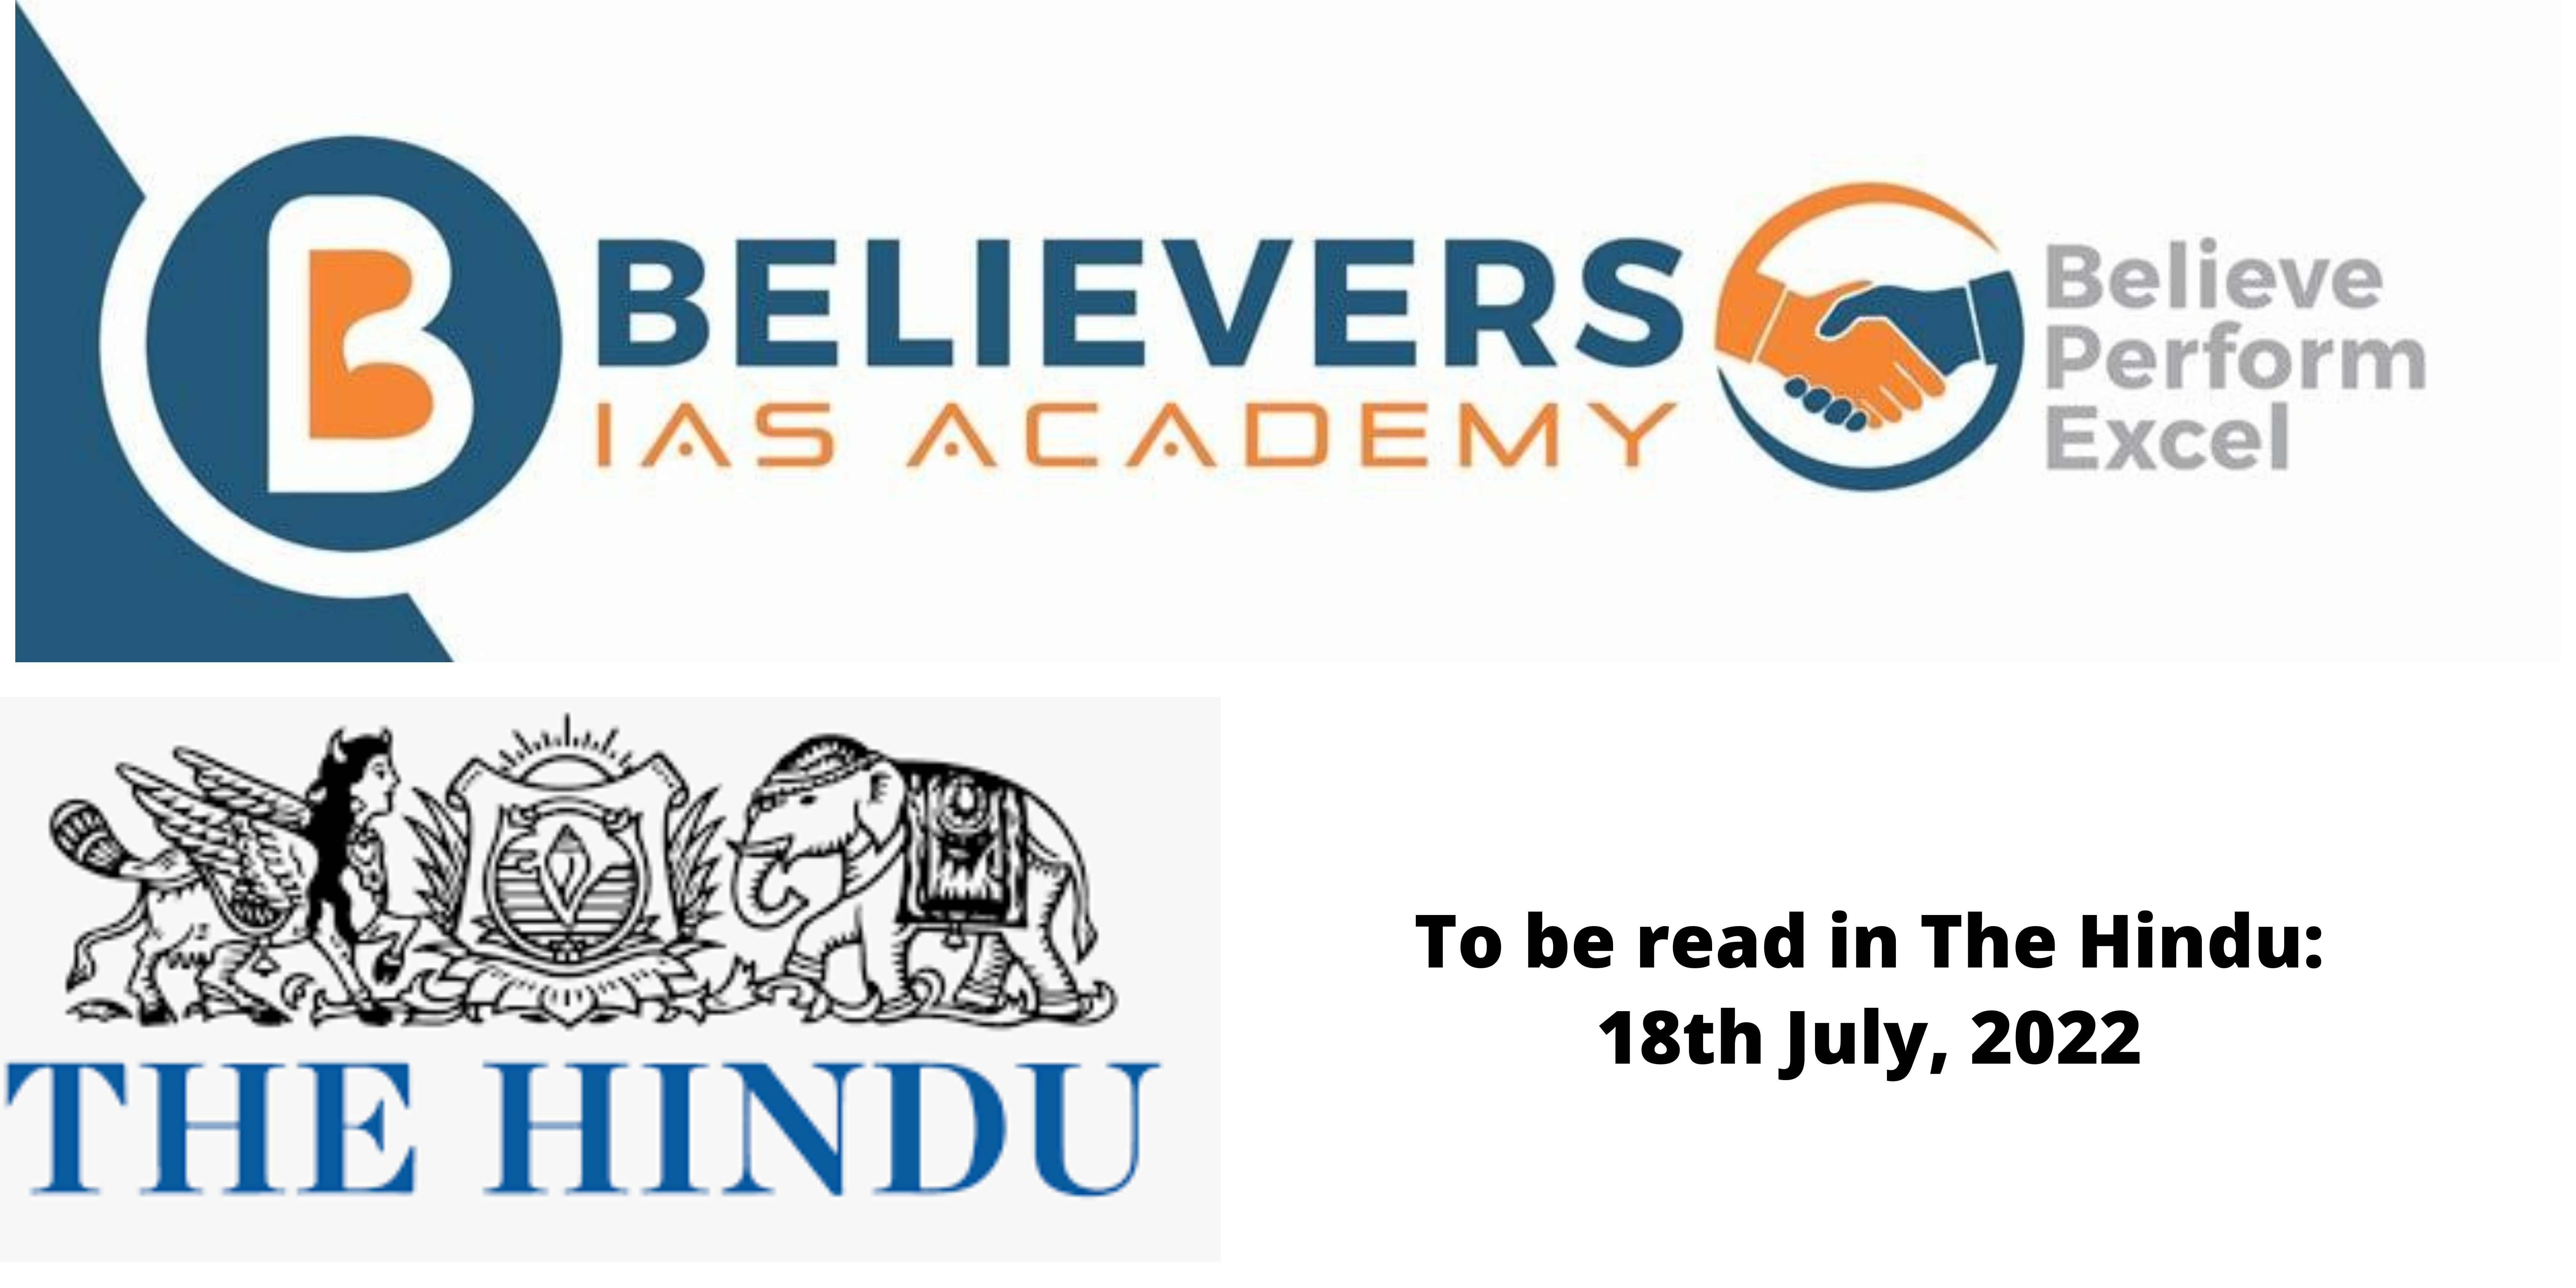 News articles for Civil Services Exam preparation - 18th July, 2022